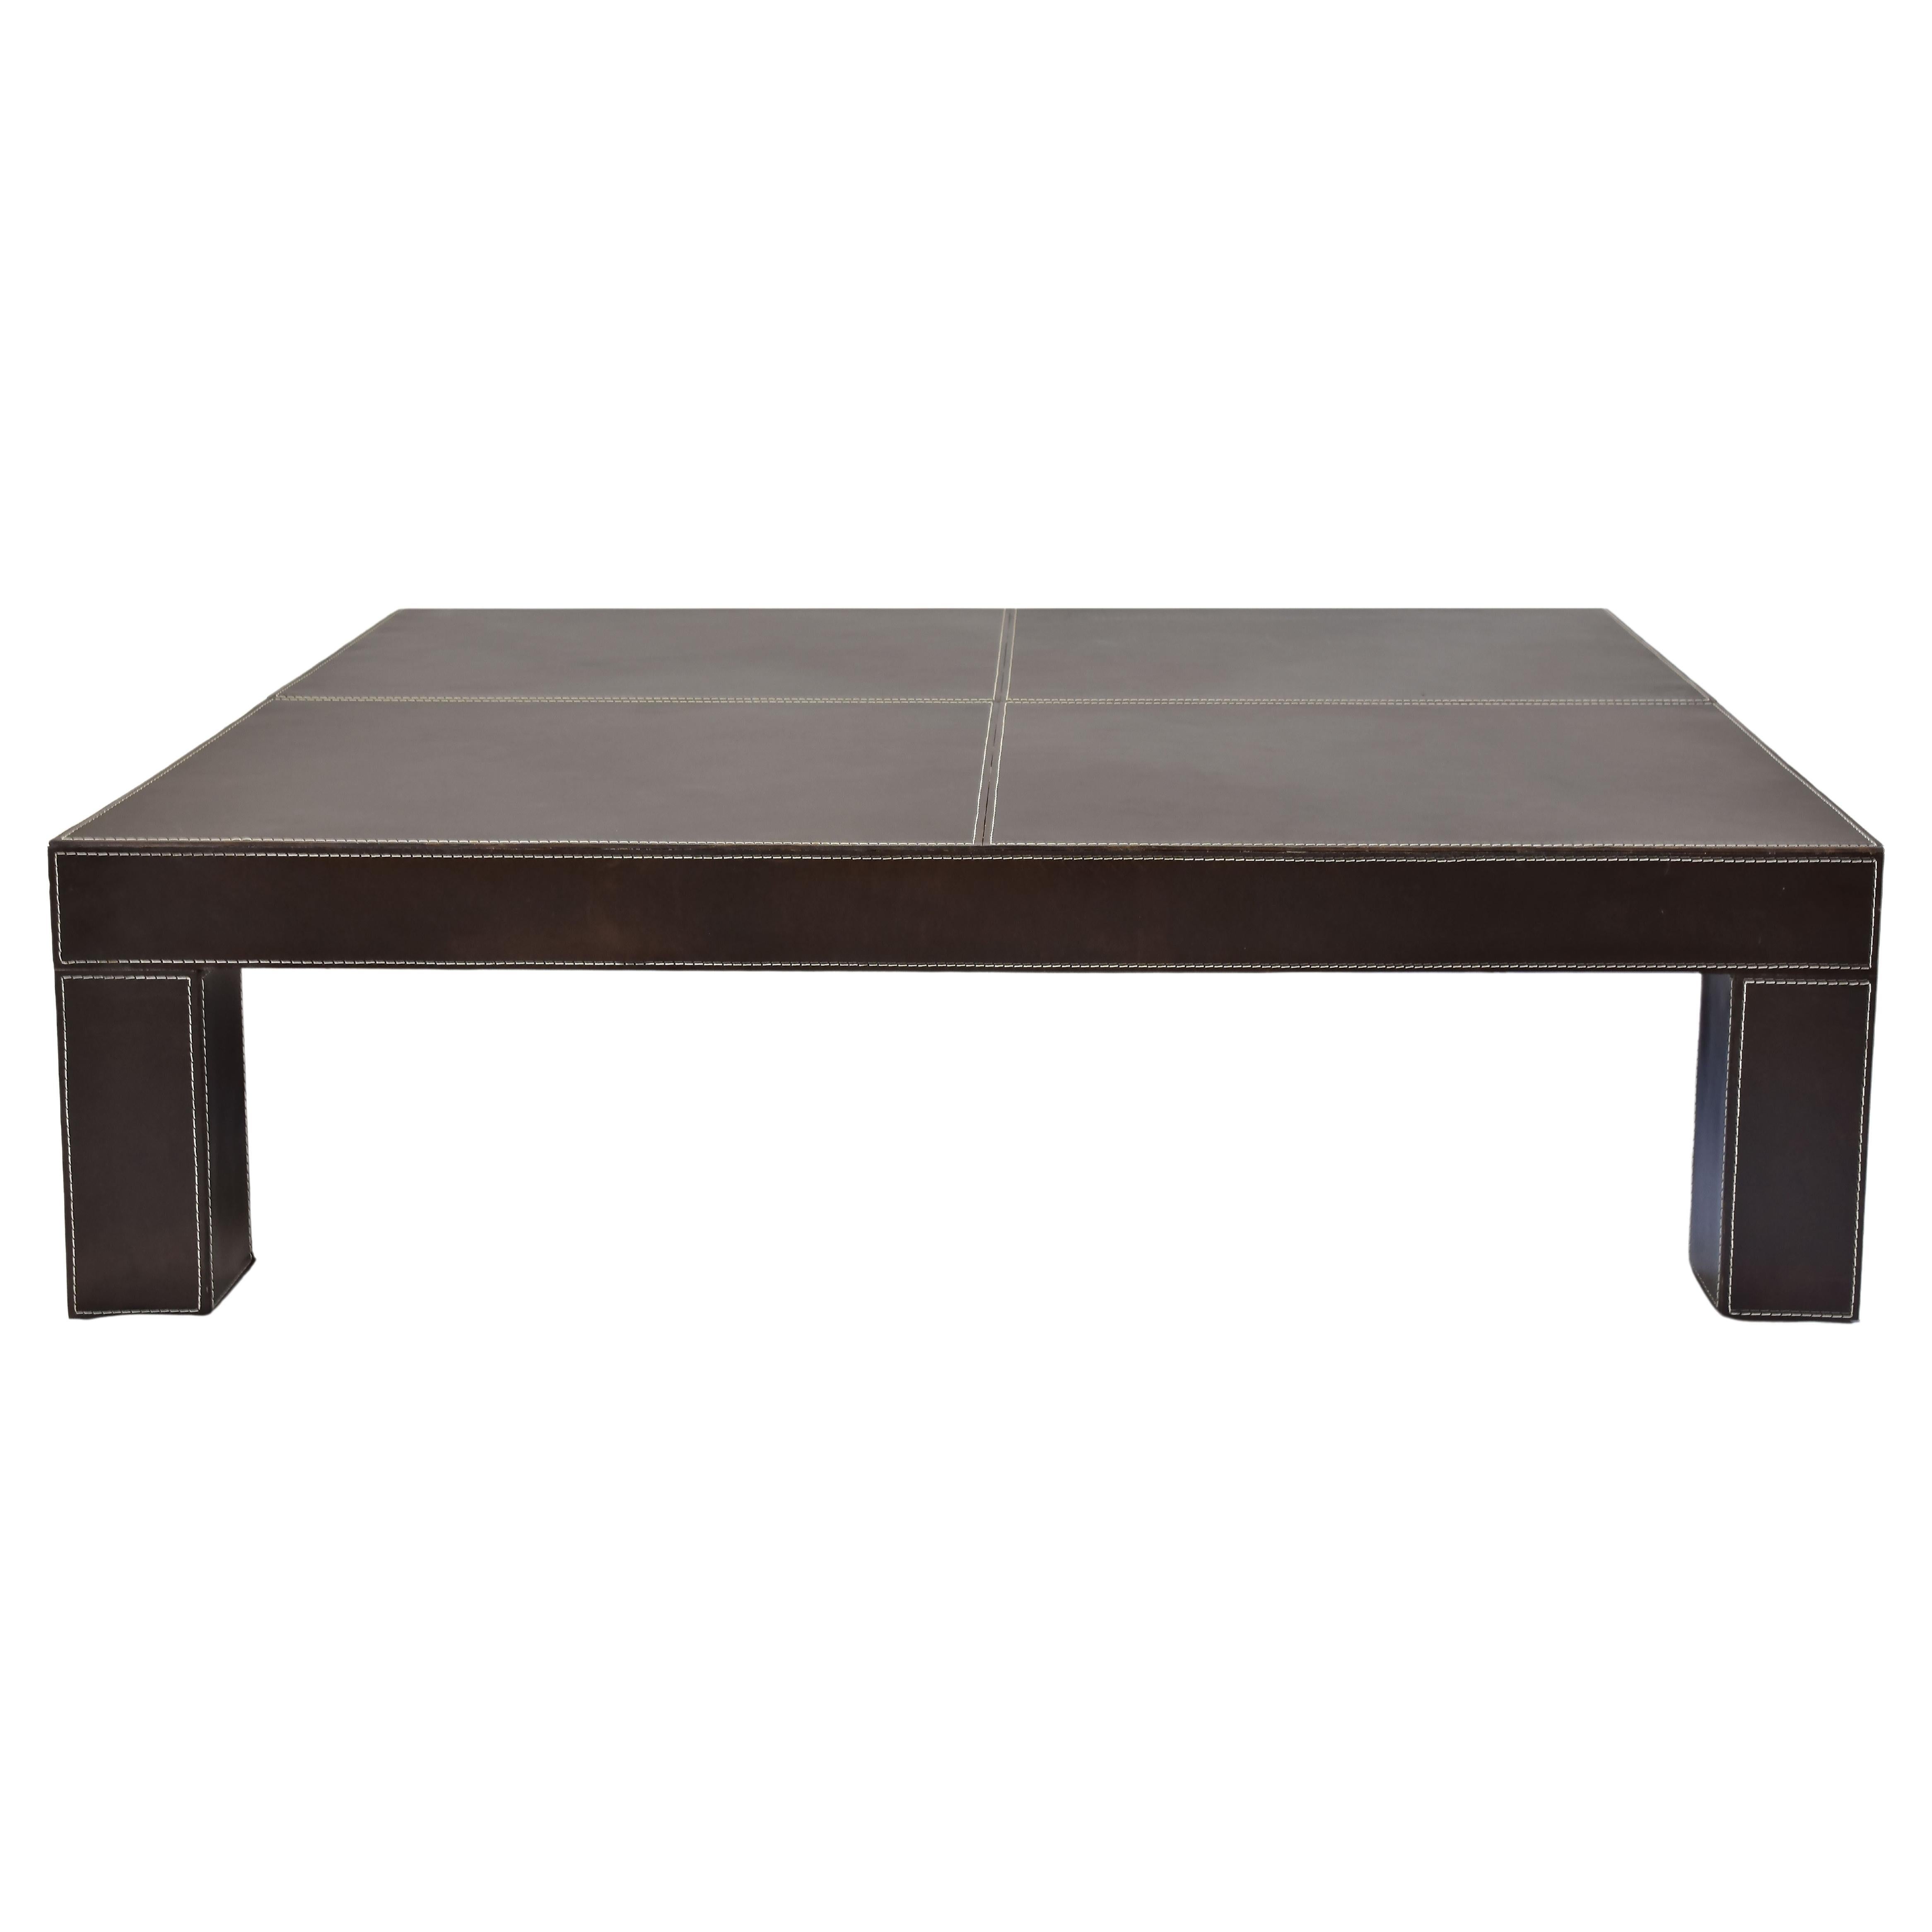 Le Jeune Upholstery Saddle Up Leather Coffee Table Showroom Model For Sale